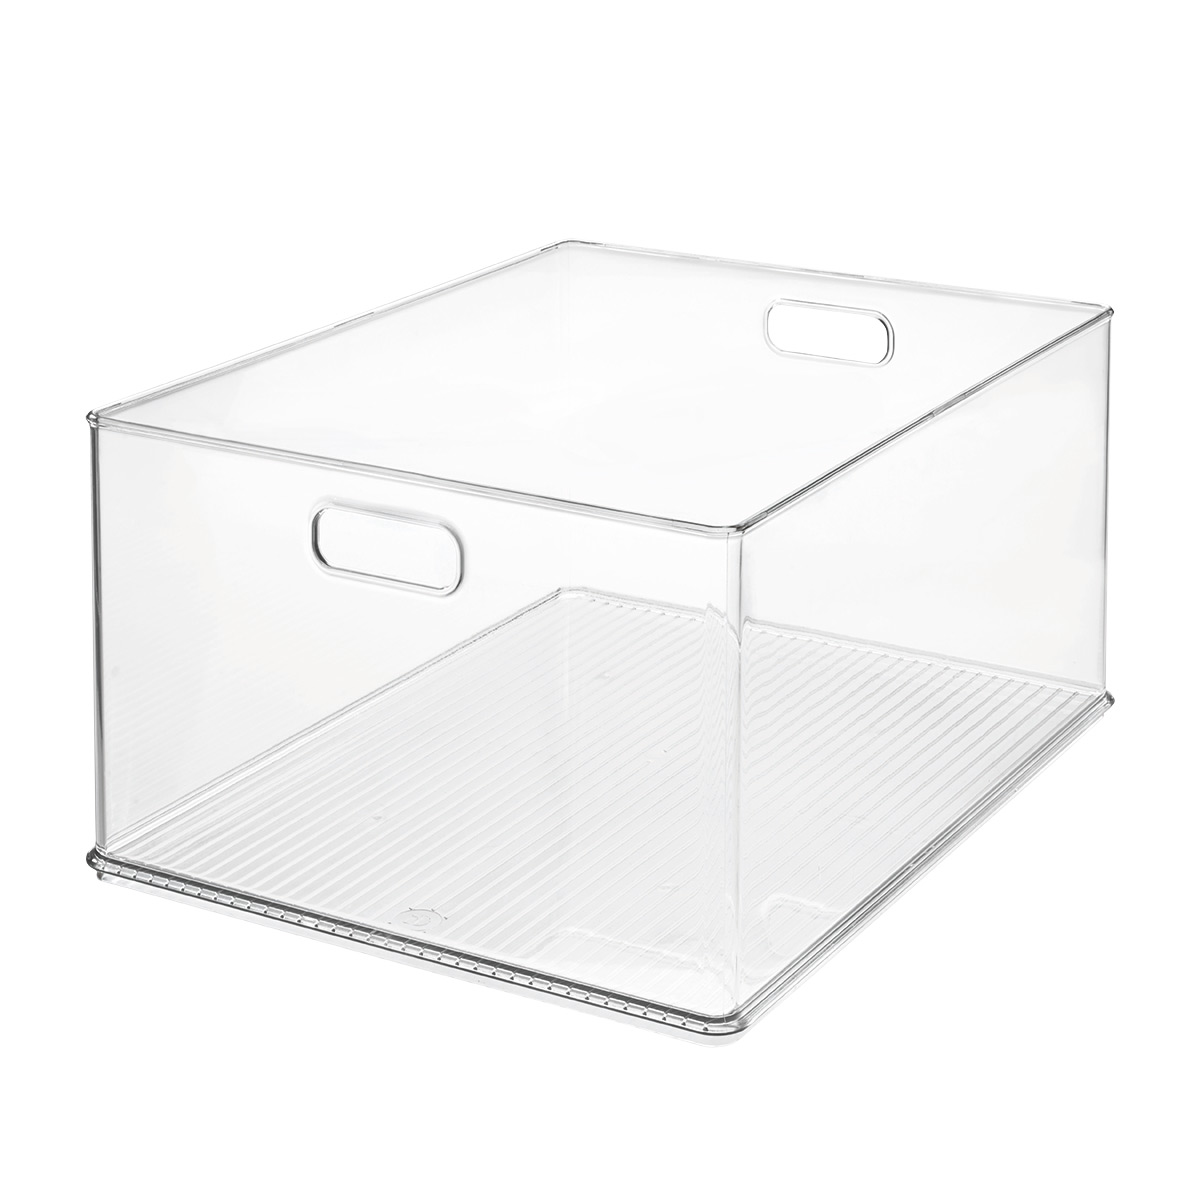 https://www.containerstore.com/catalogimages/398330/10082405-iDESIGN-Large-Stackable-Clo.jpg